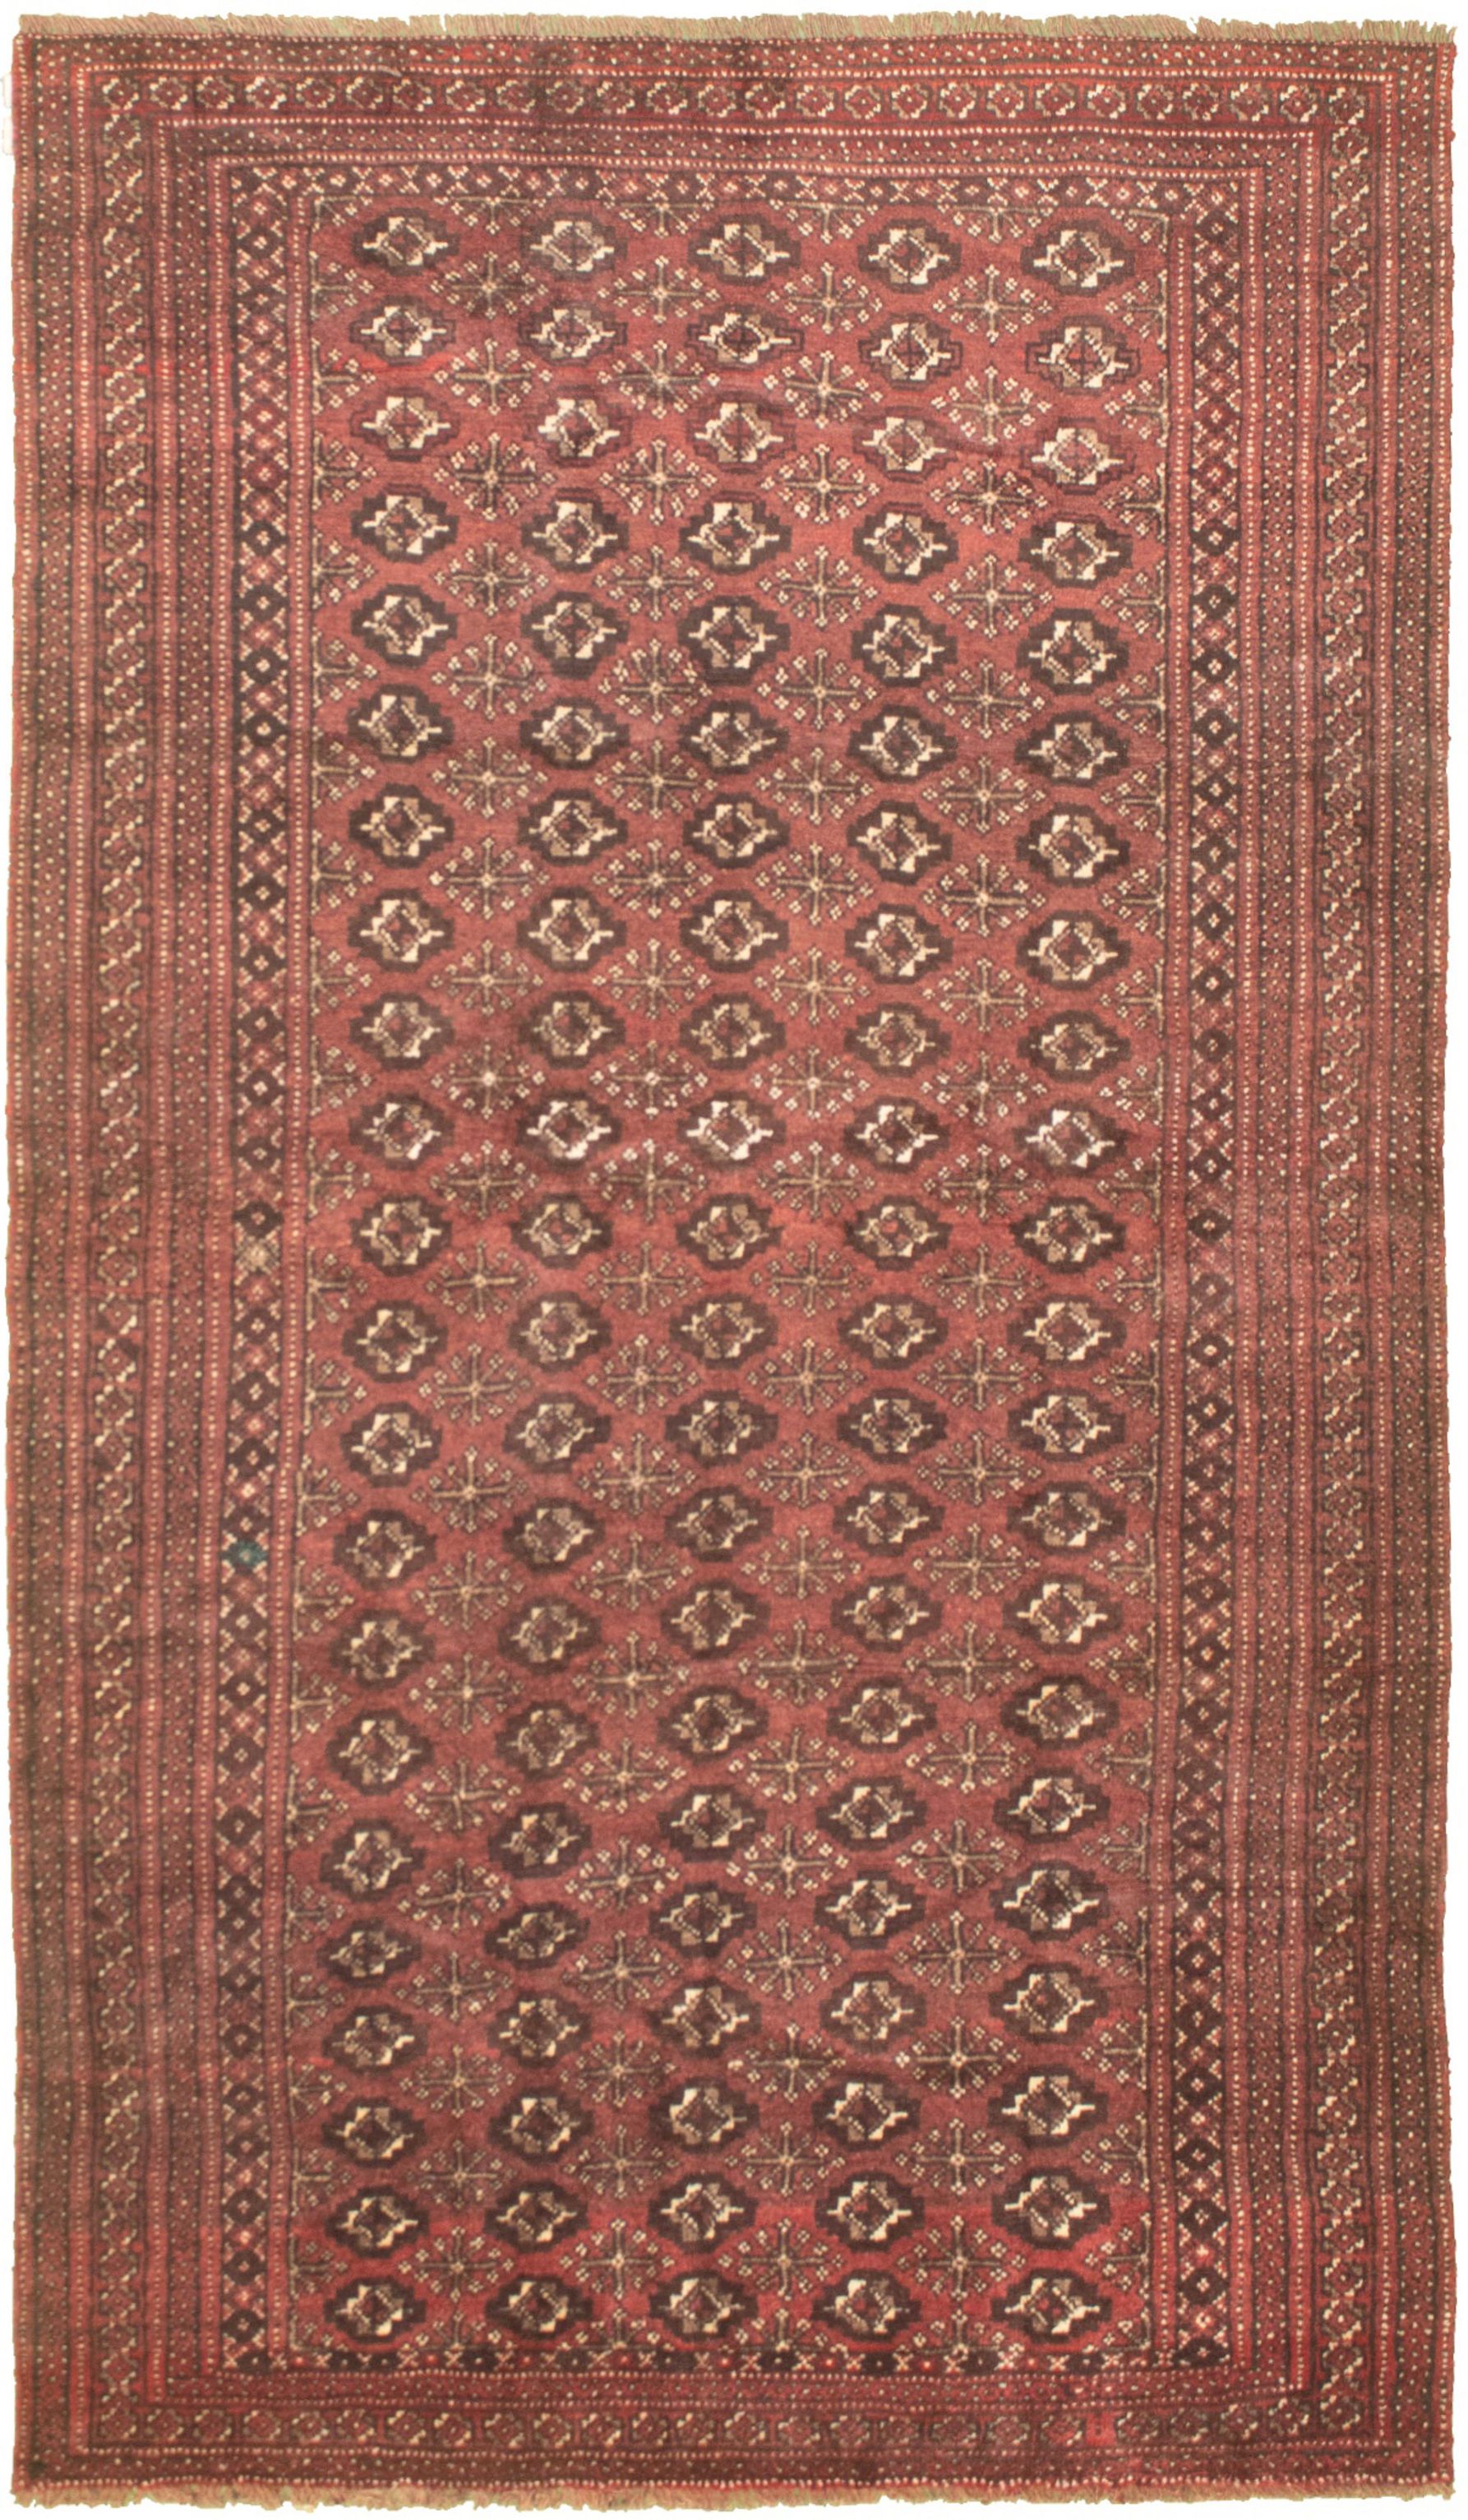 Hand-knotted Authentic Turkish Dark Brown Wool Rug 4'10" x 8'10" Size: 4'10" x 8'10"  